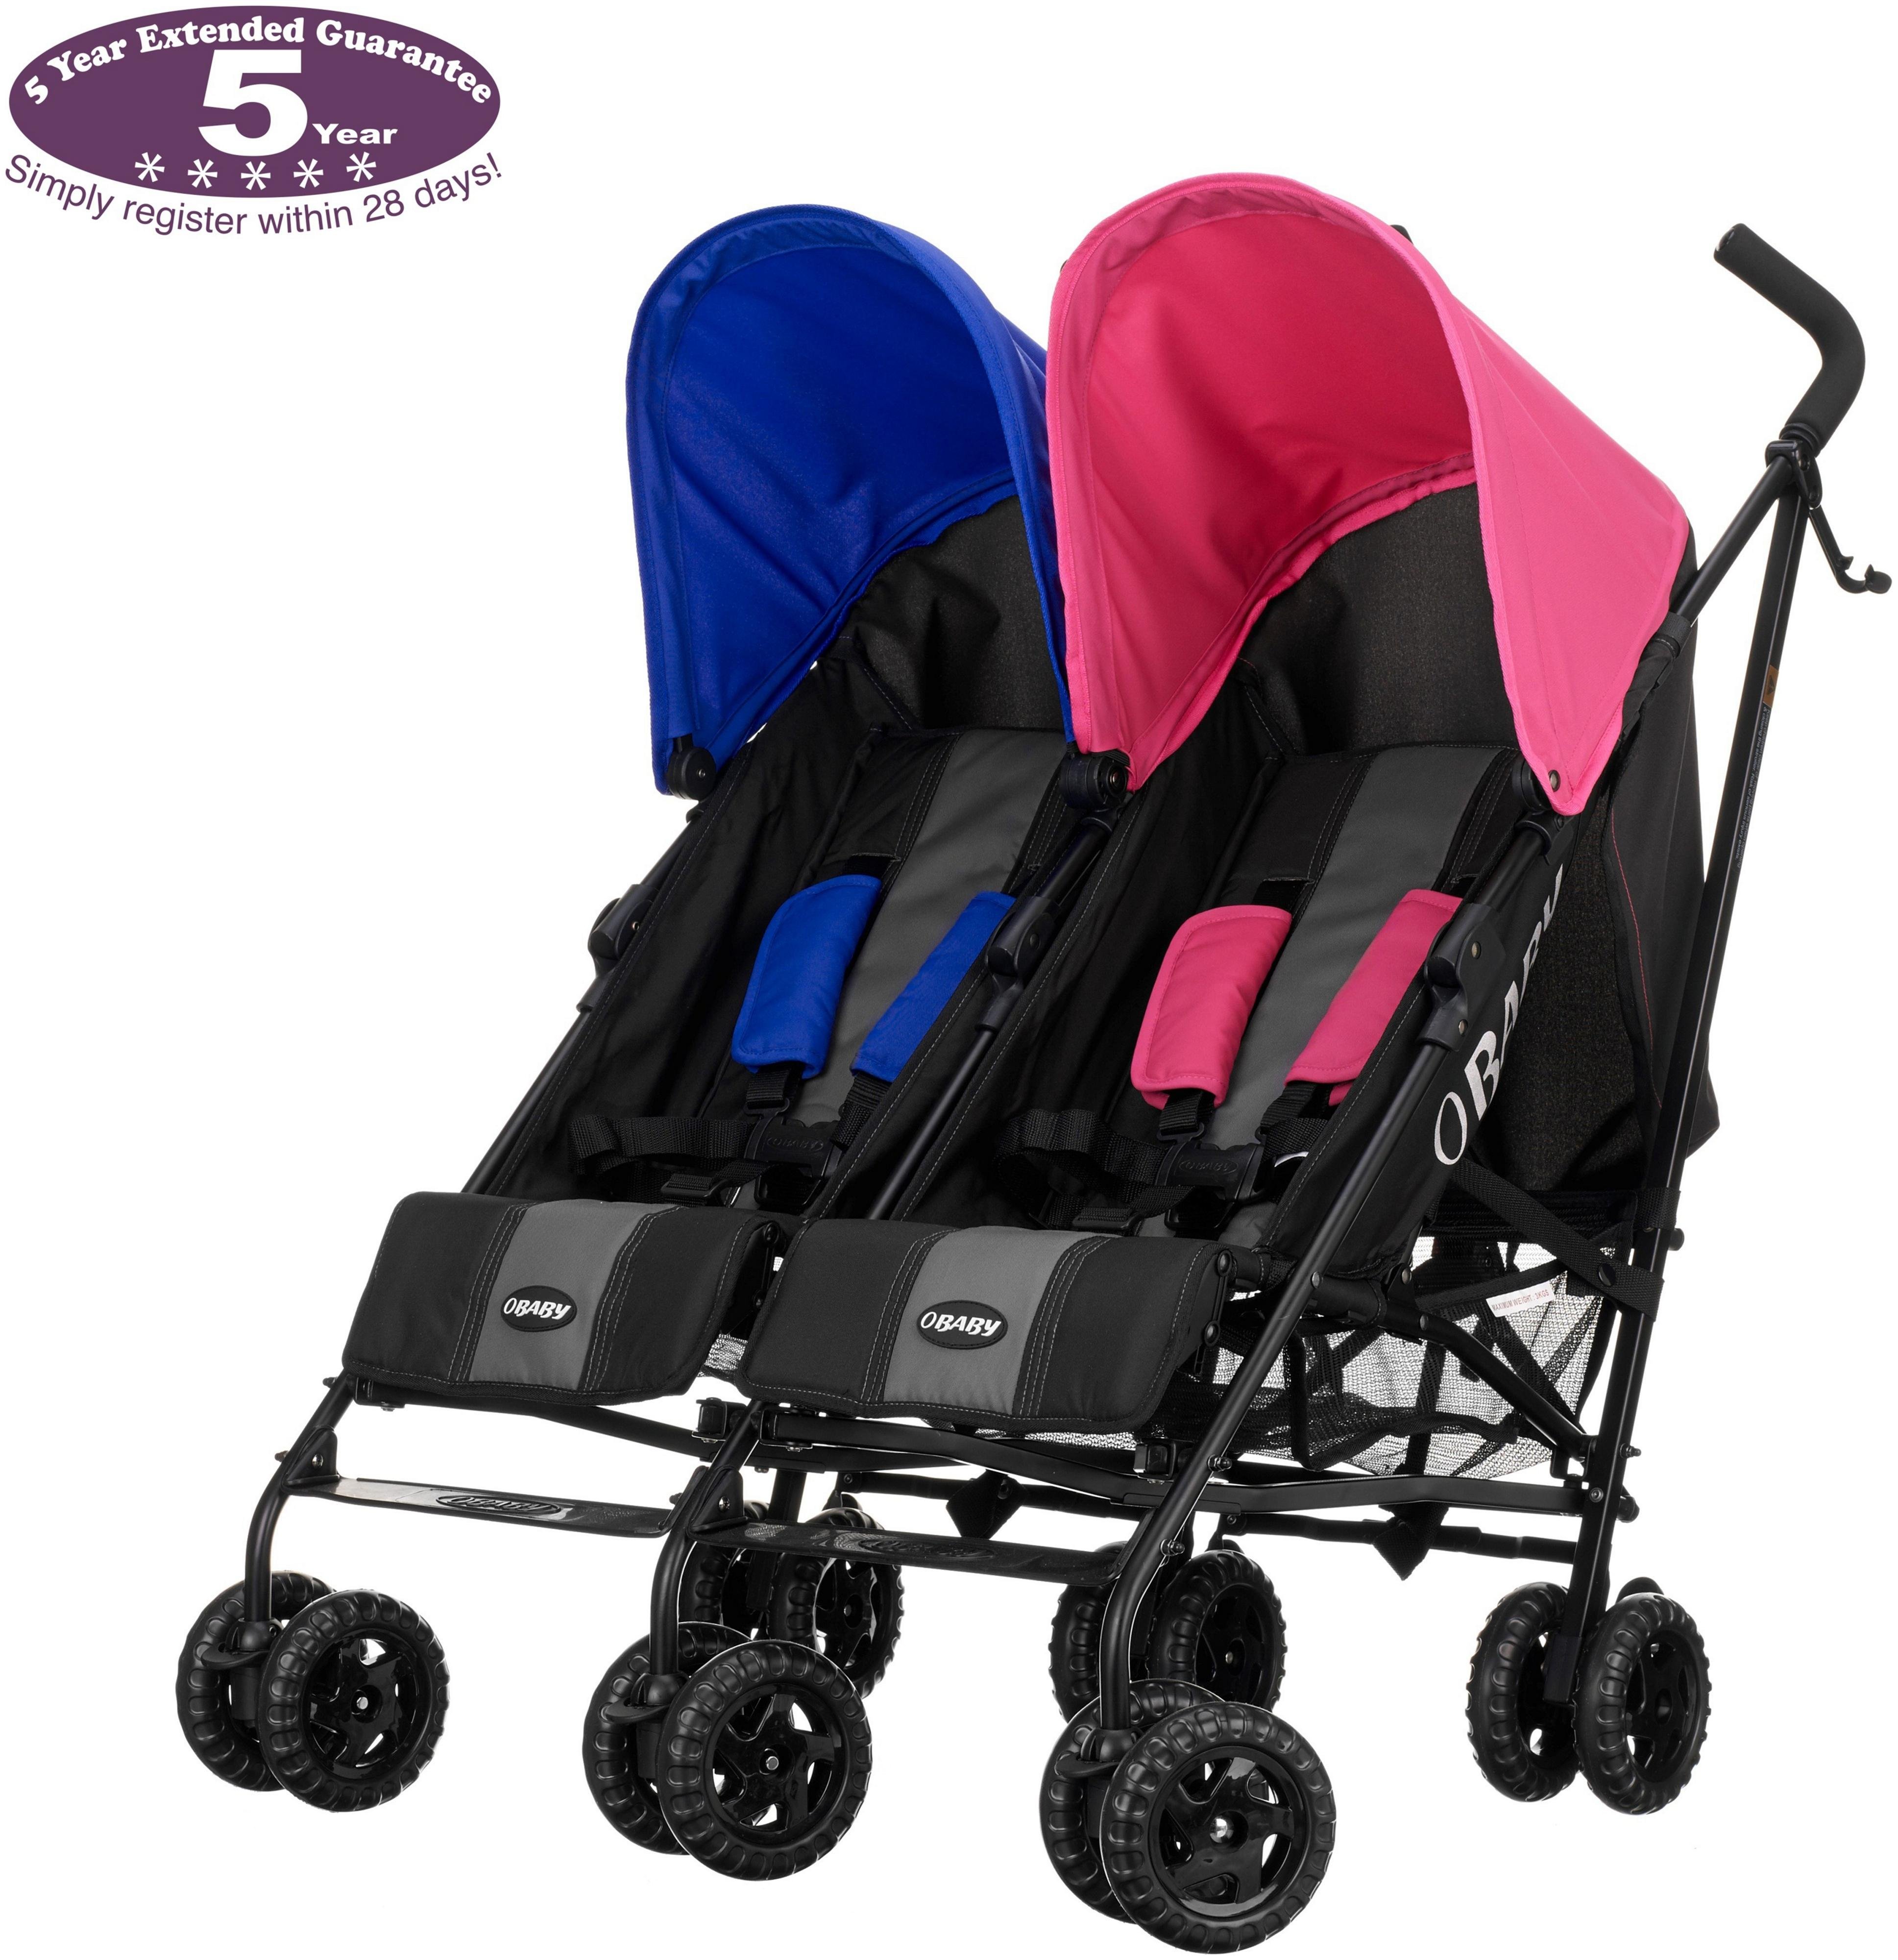 Obaby Apollo Black and Grey Double Pushchair - Pink & Blue